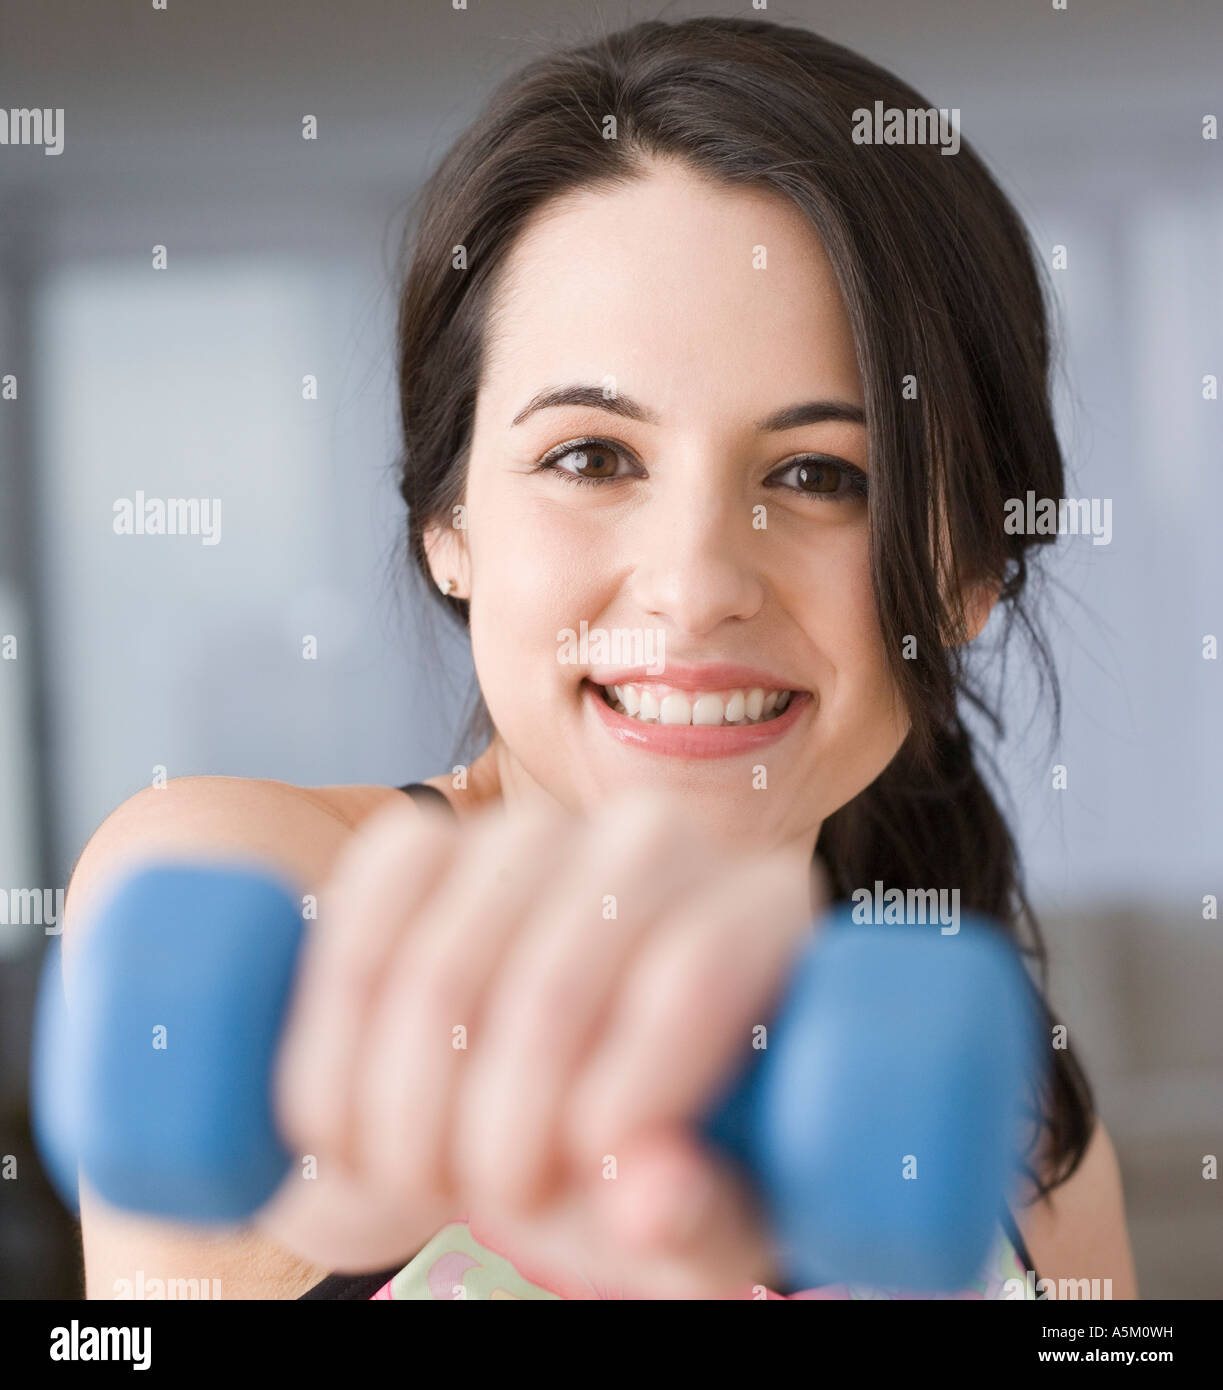 Portrait of woman lifting weights Stock Photo